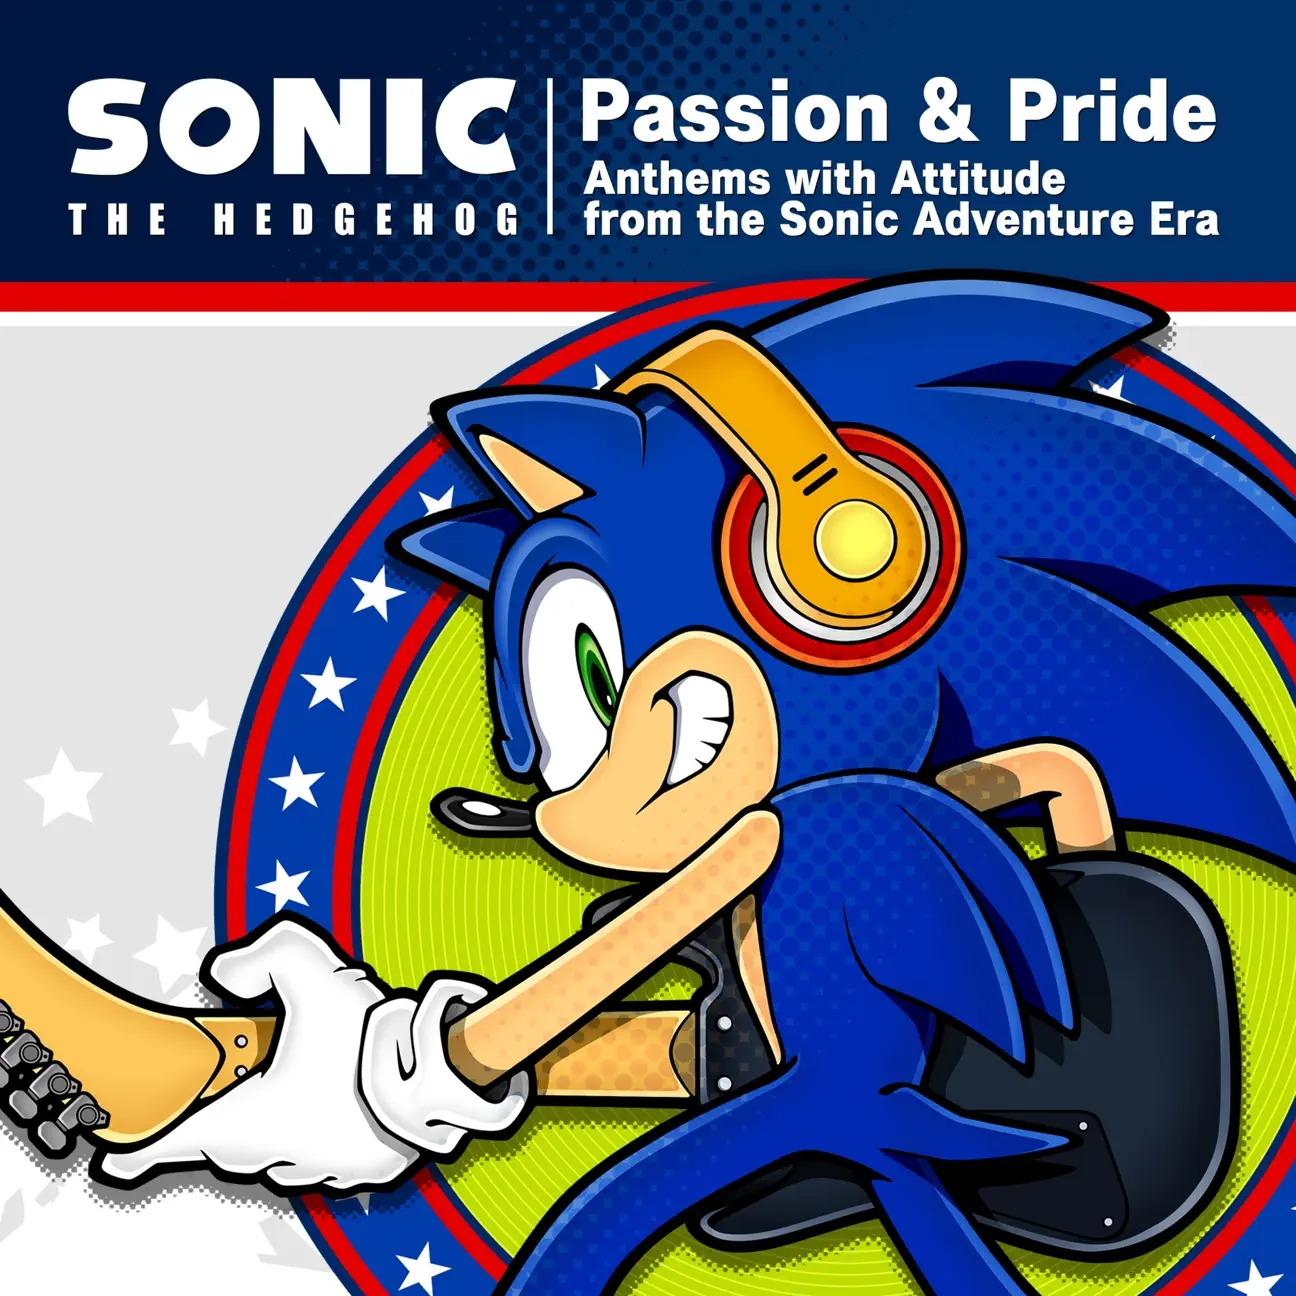 Sonic the Hedgehog: Passion & Pride - Anthems with Attitude